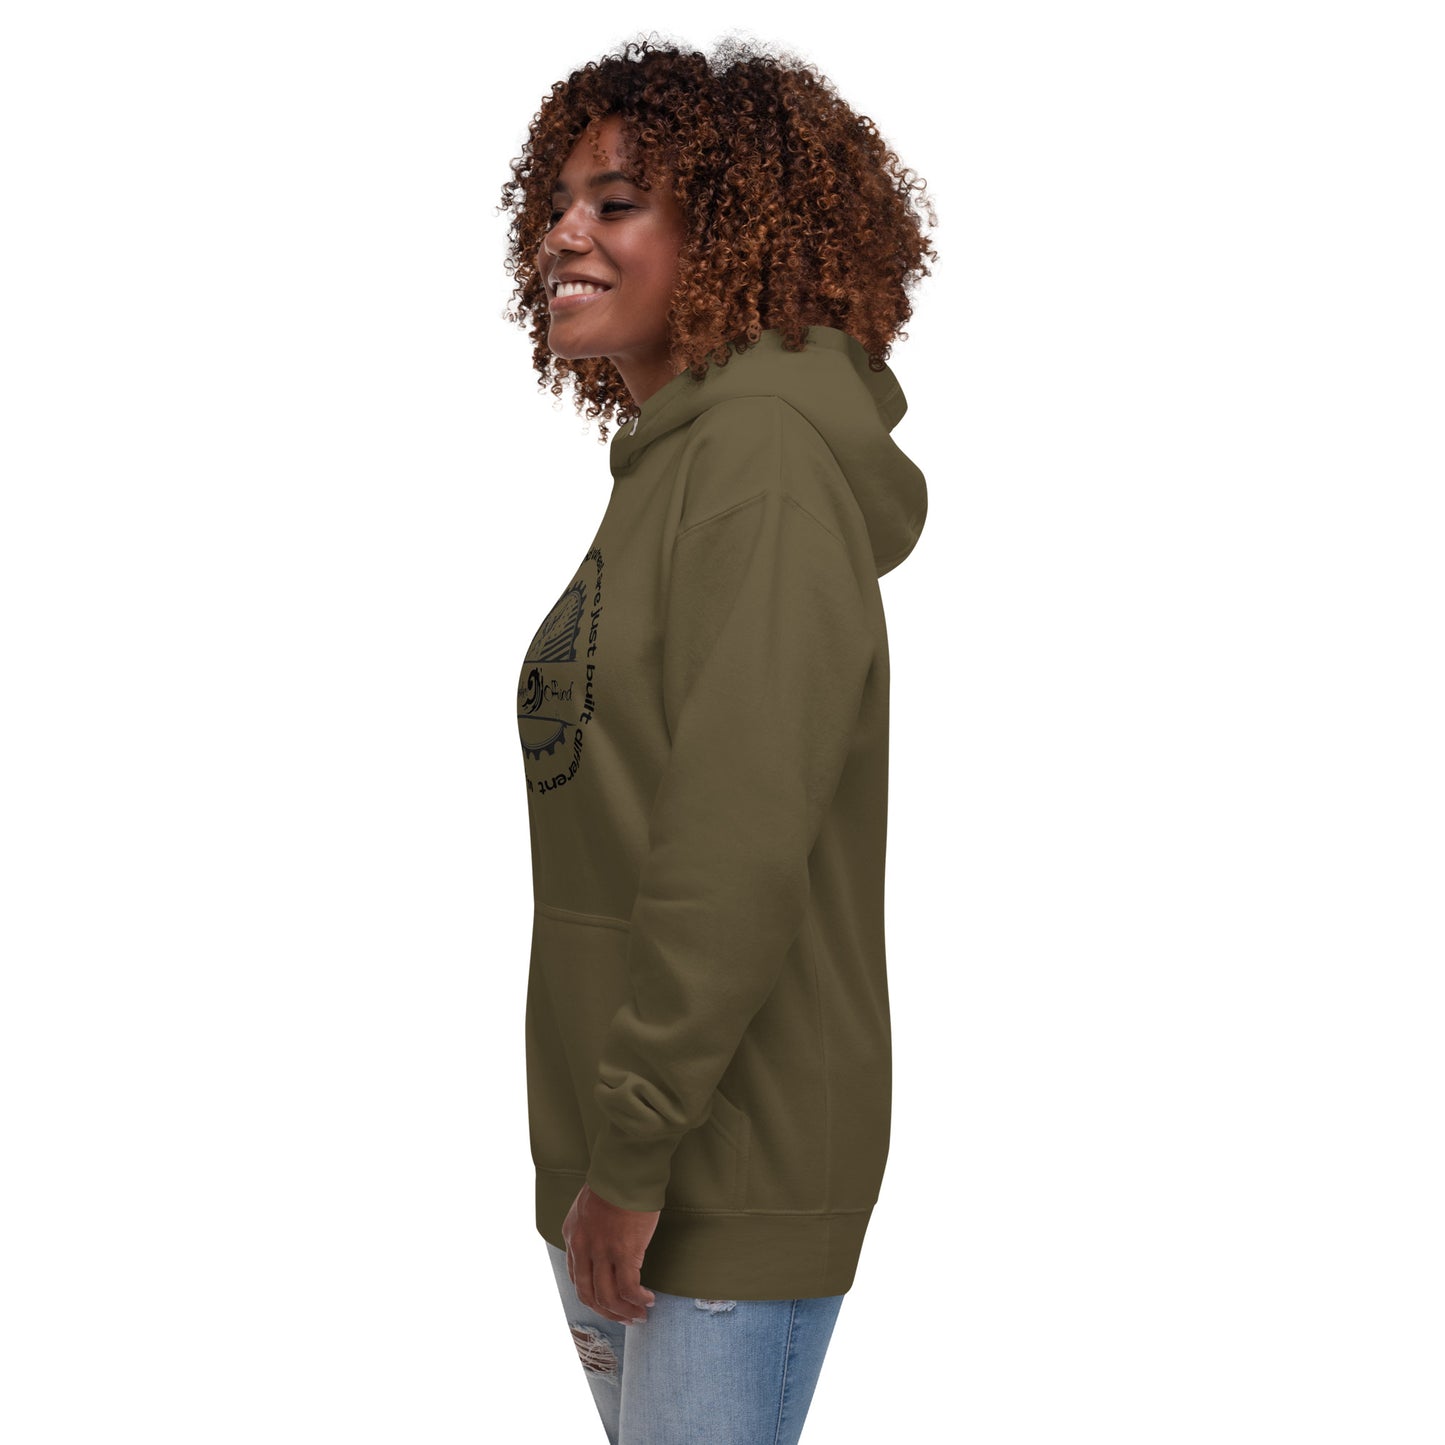 a woman with curly hair wearing a green hoodie